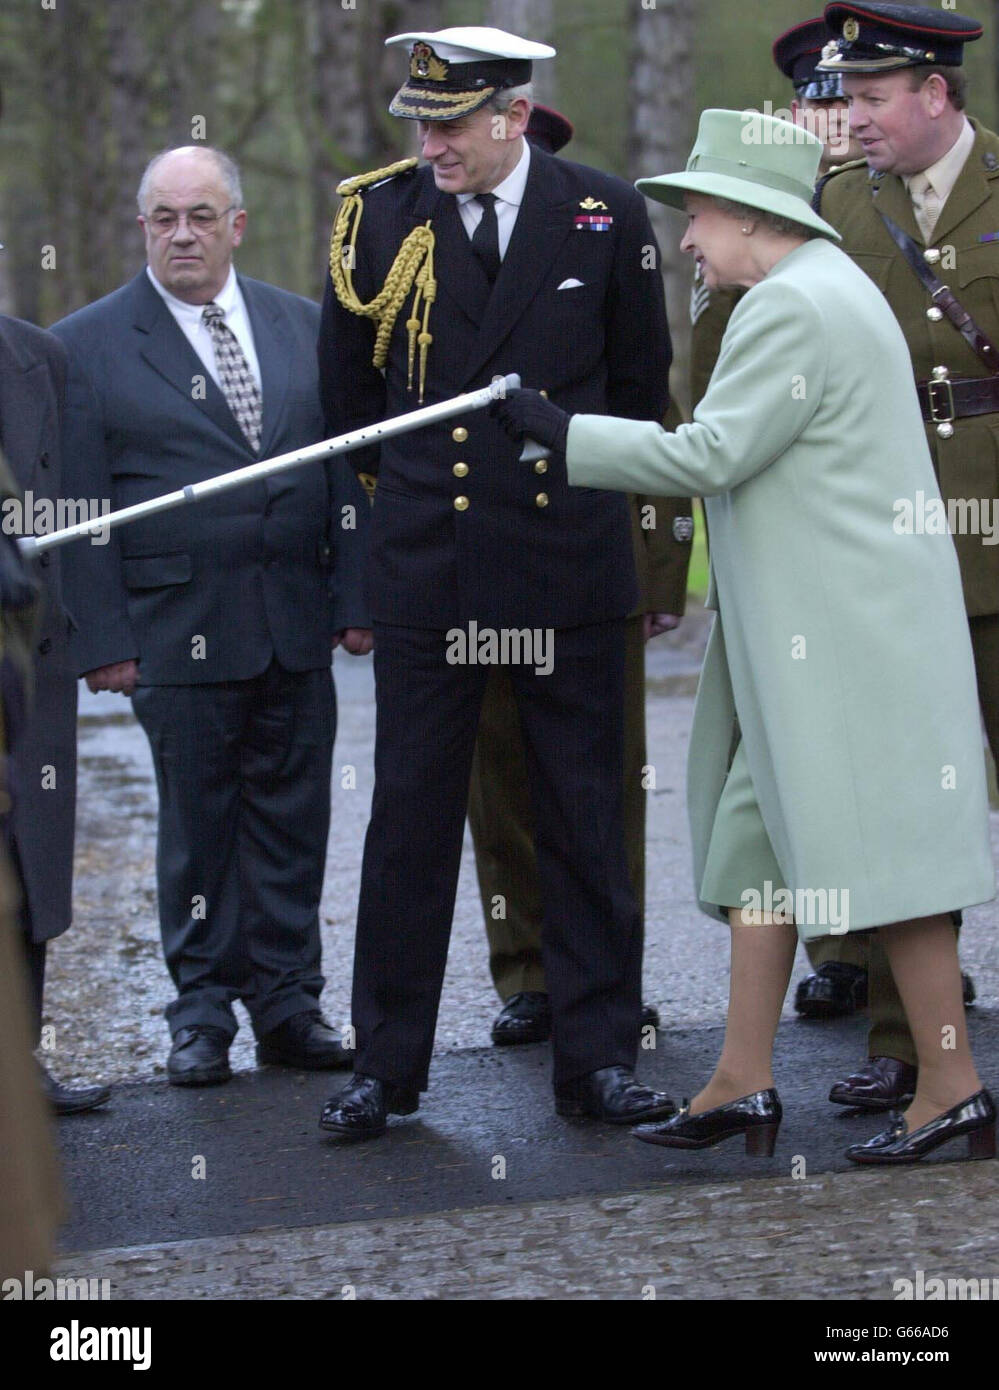 HRH Queen Elizabeth II walking with the aid of a stick as she carried out her first official public engagement since under going surgery on her right knee 16 days ago. * She was accompanied by Chief of Defence Staff, Sir Michael Boyce, after the opening of the new Sandringham Gates. Stock Photo